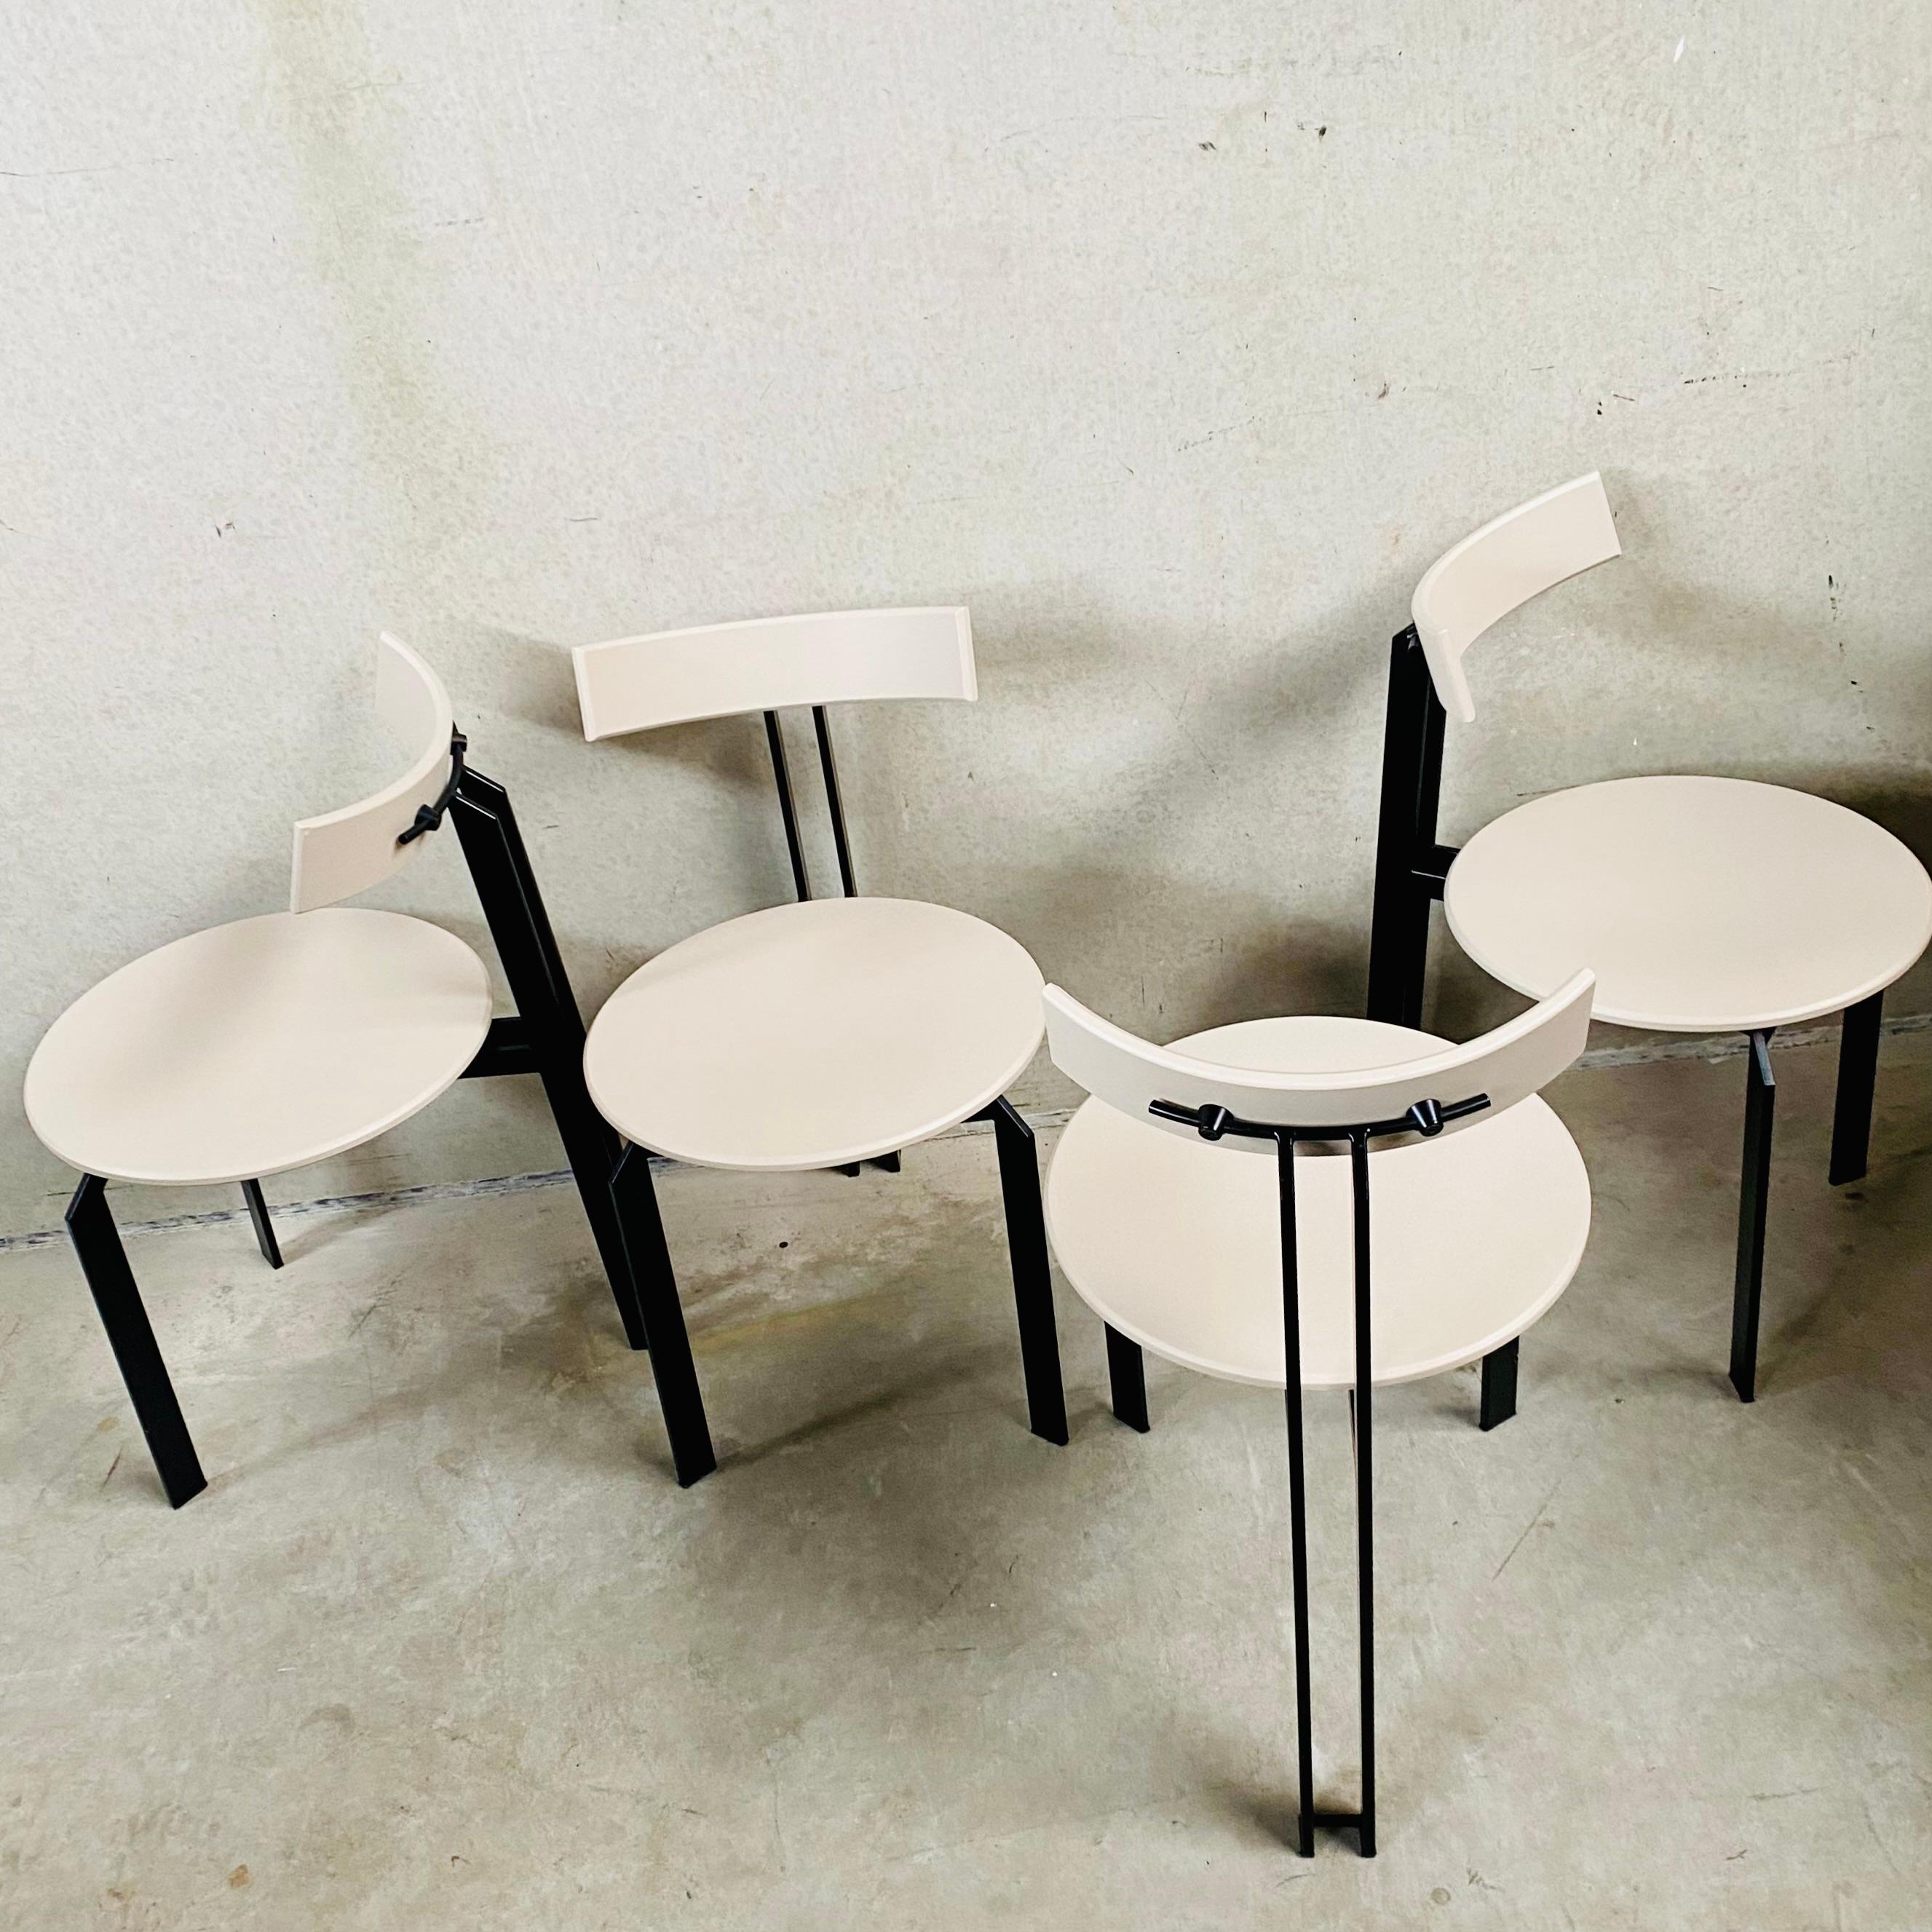 4 x Brutalist ZETA Dining Chairs by Martin Haksteen for Harvink, Netherlands  For Sale 4